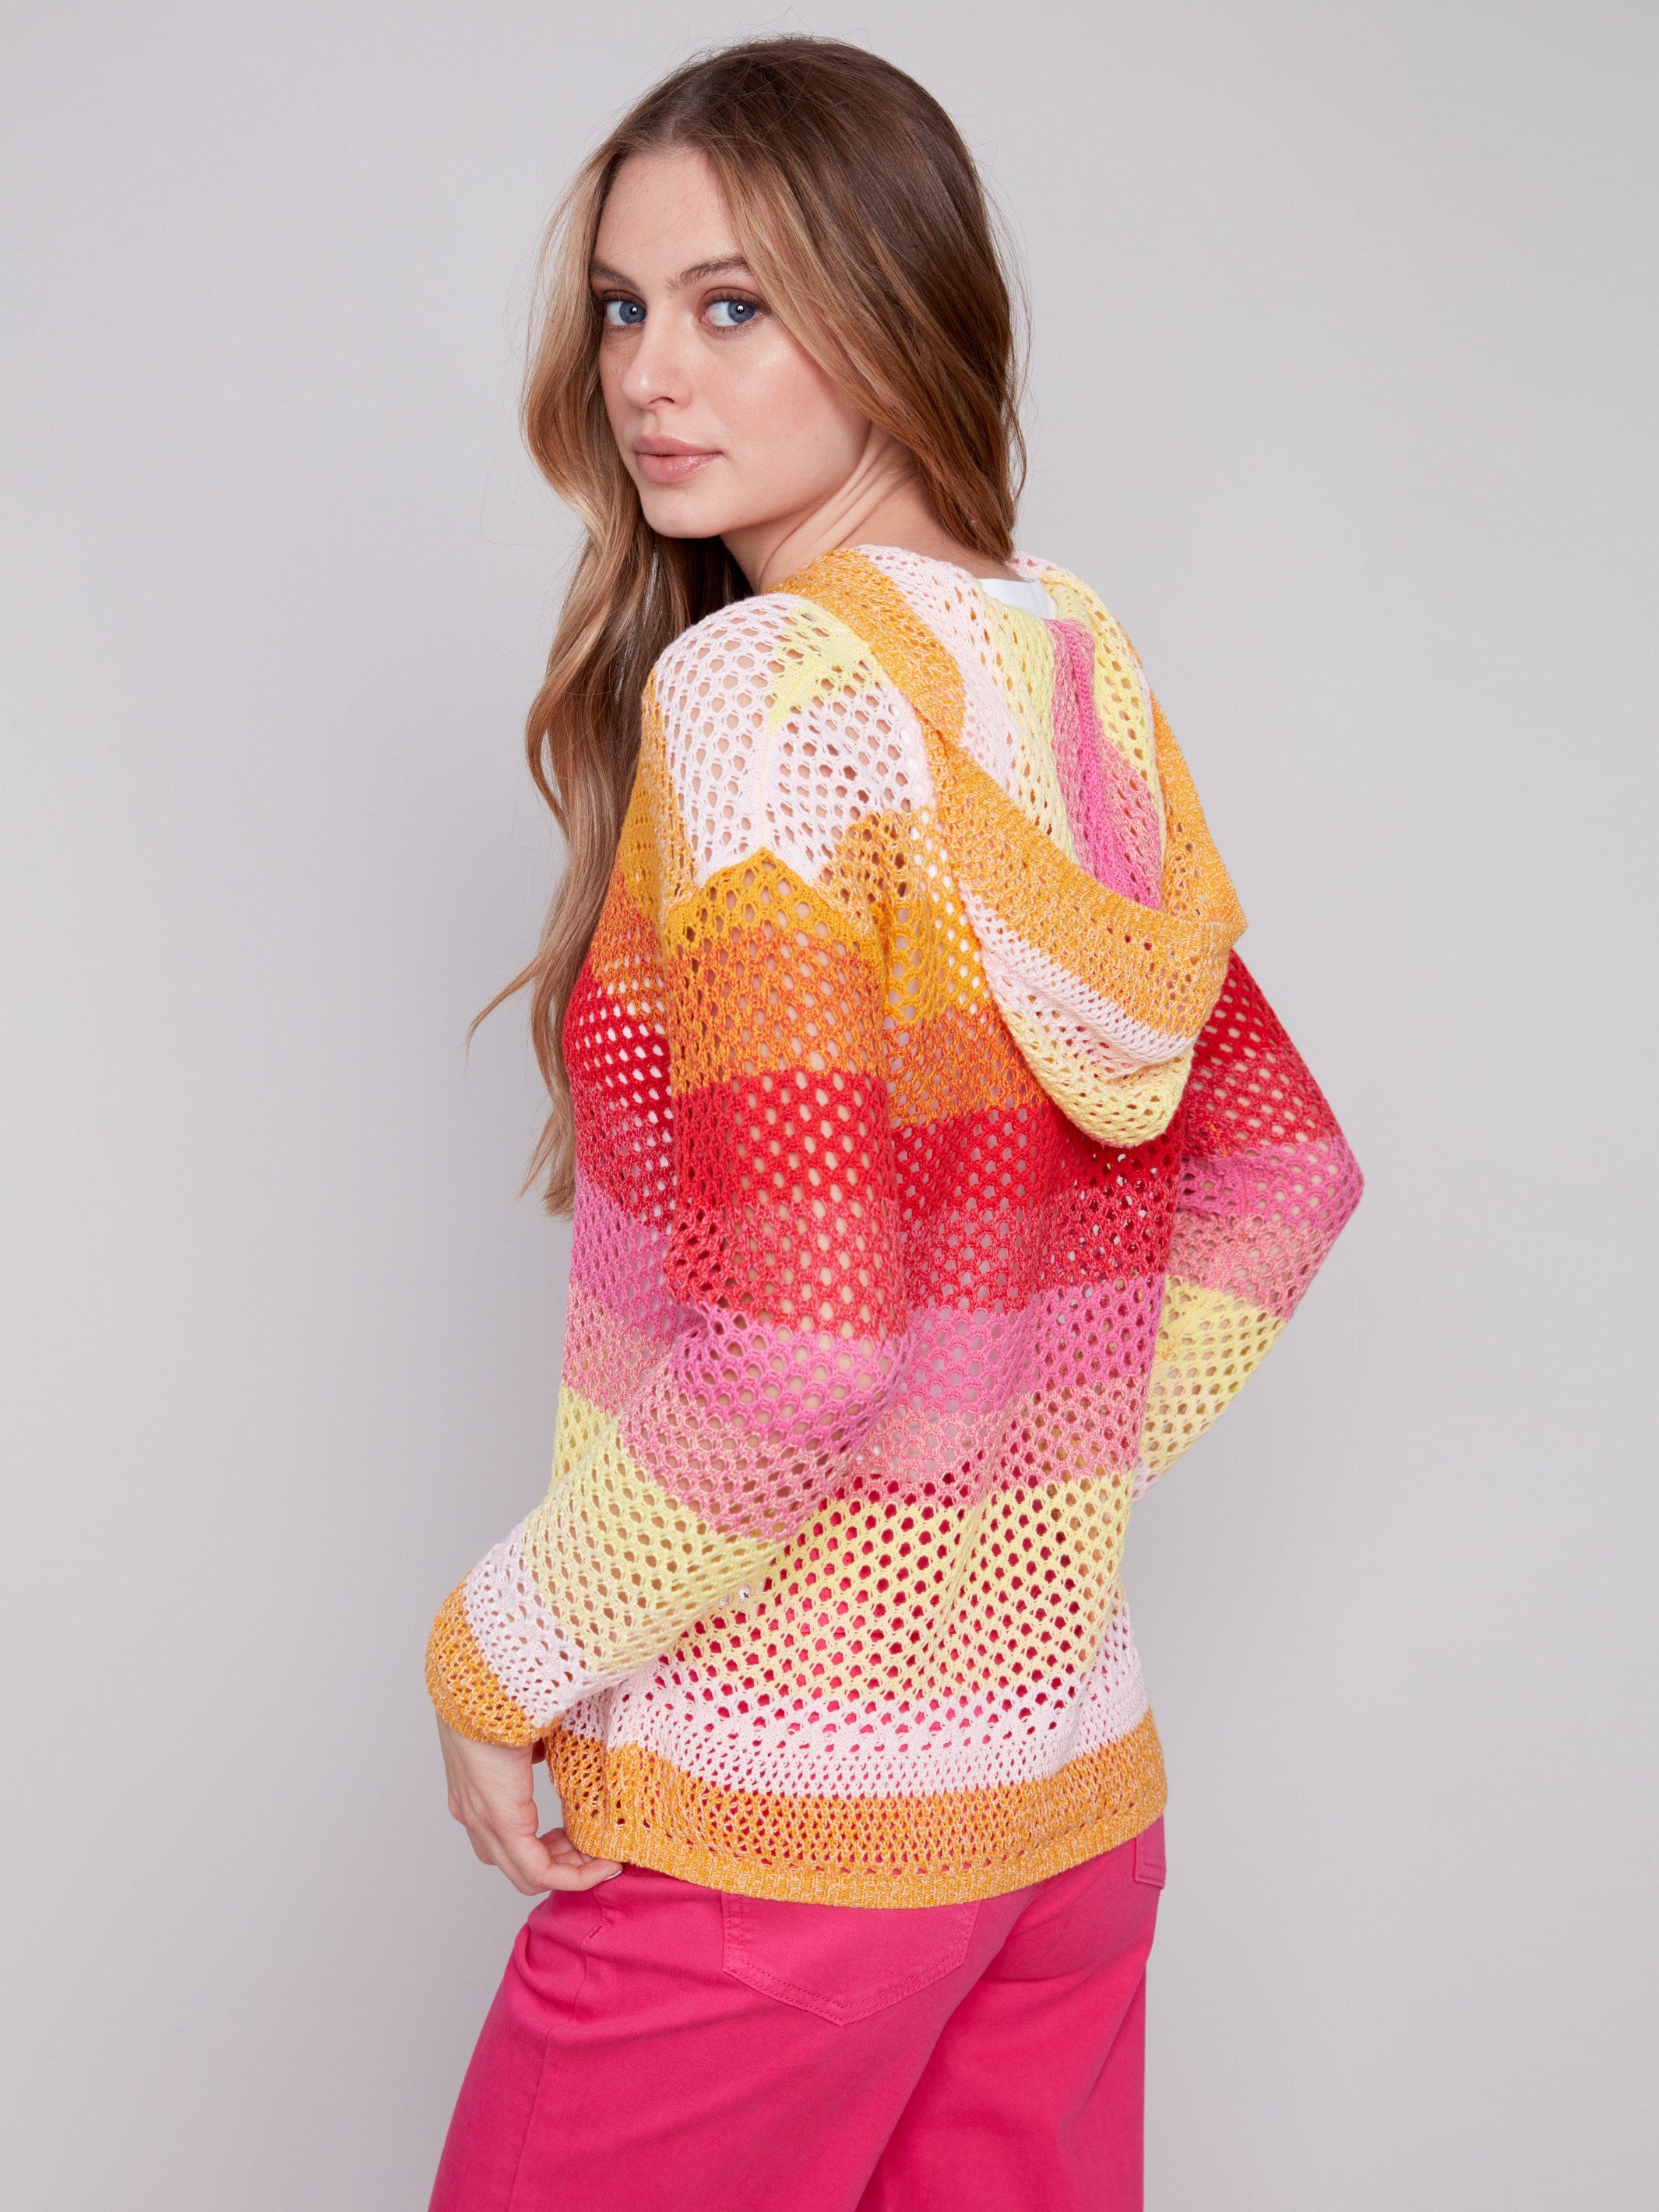 Striped Fishnet Crochet Hoodie Sweater - Punch - Charlie B Collection Canada - Image 2